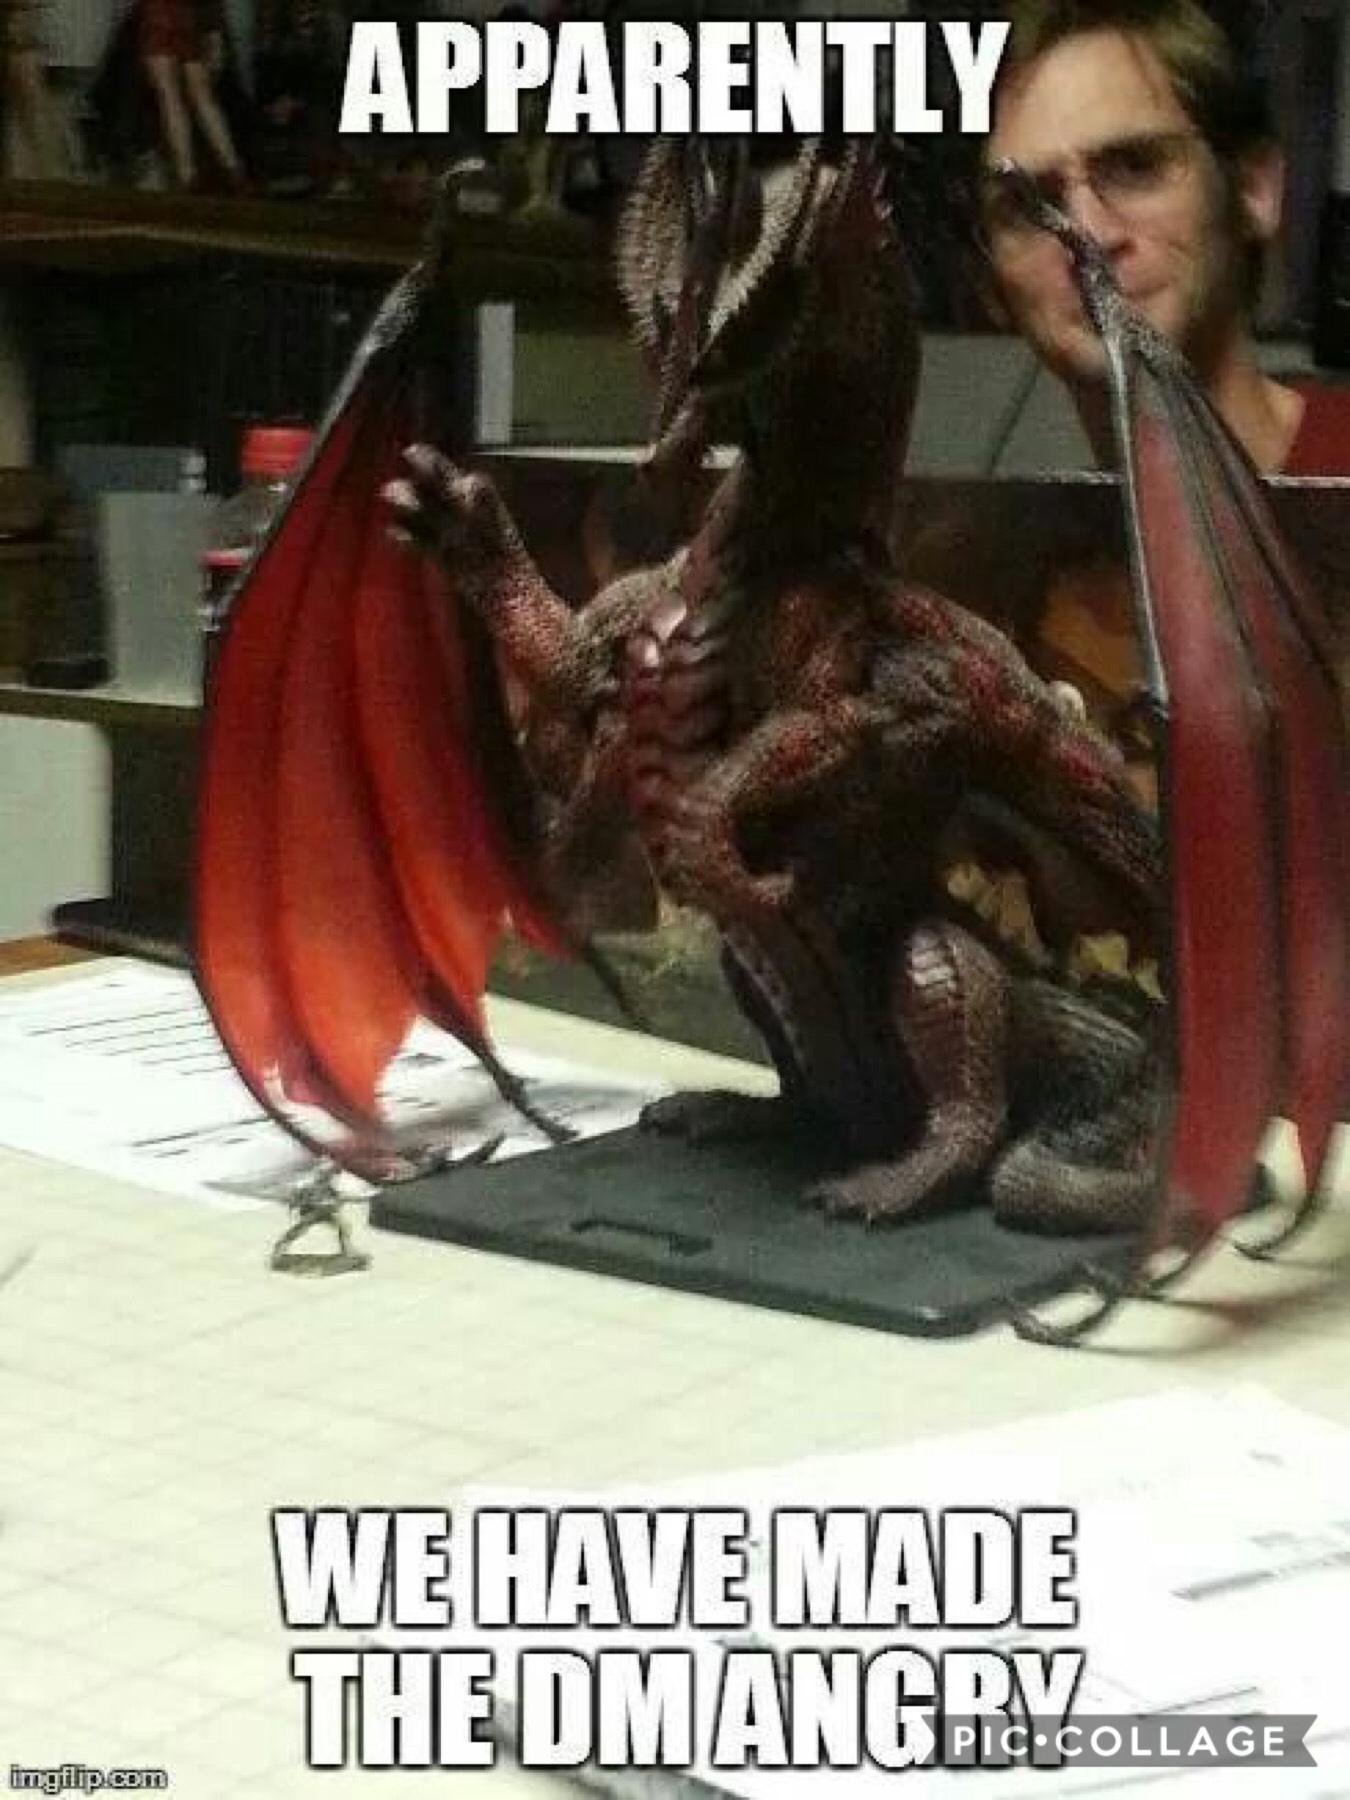 🐉⚔️Tapith⚔️🐉
Don’t cross me D&D players......